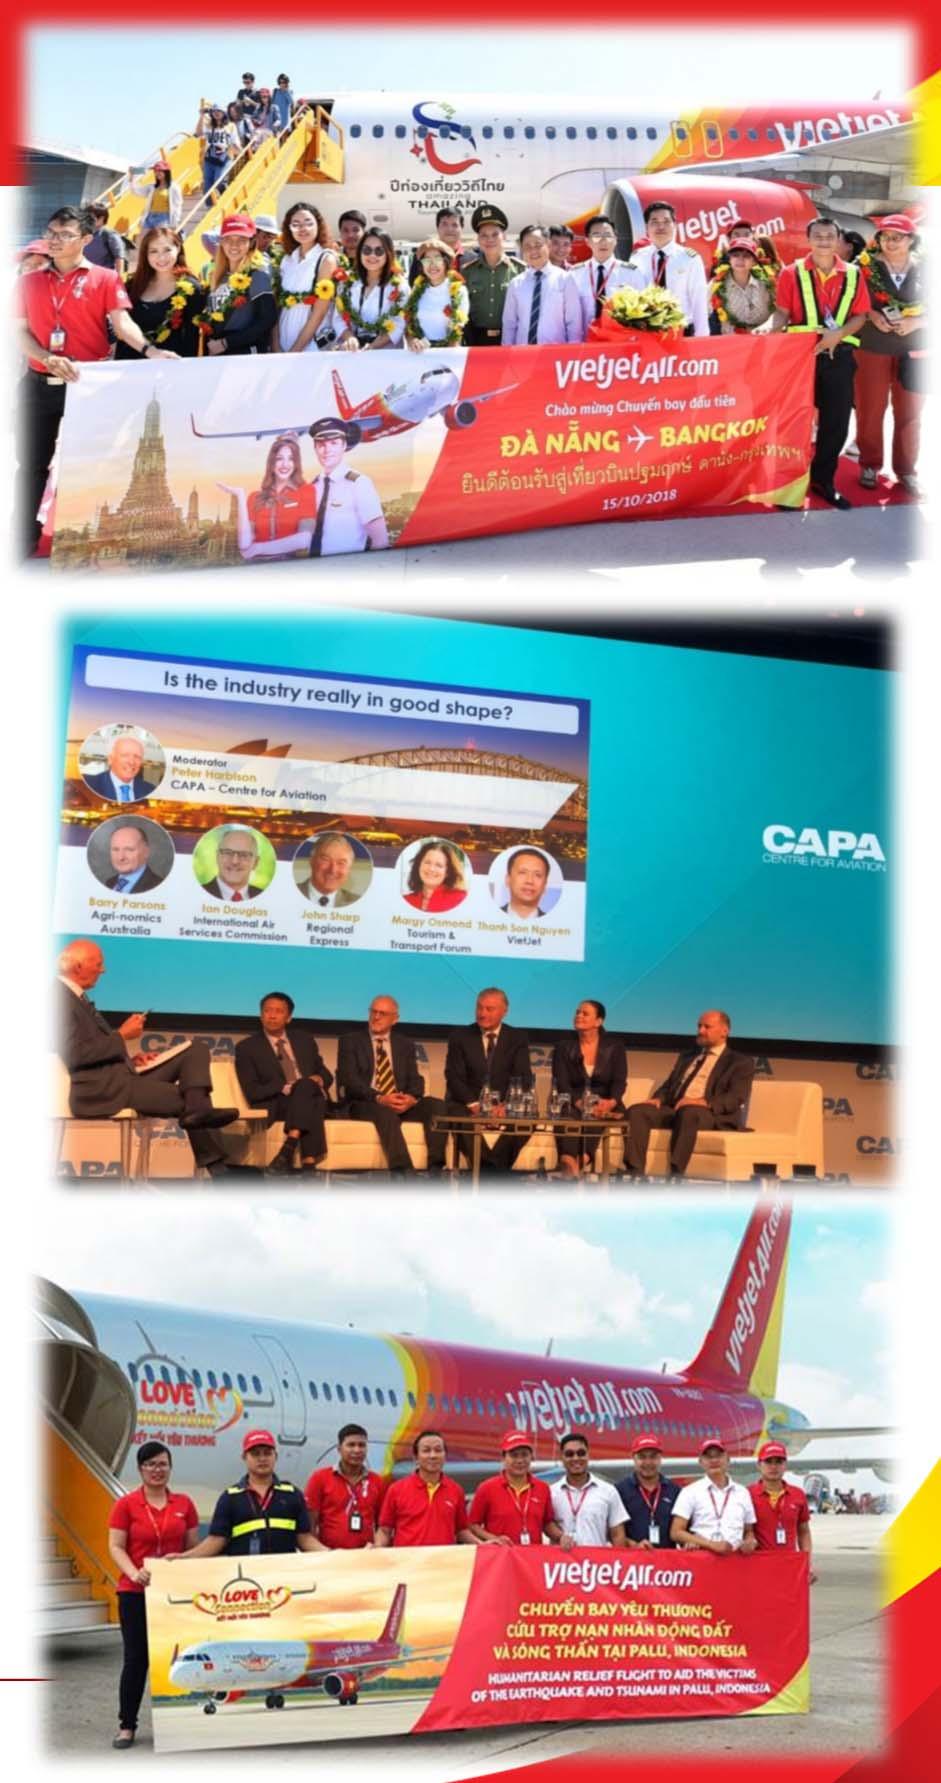 Typical events of the Q3 2018 Welcomed the first flight of Da Nang - Bangkok (Thailand) and Nha Trang - Da Nang route Attended Australia Pacific Aviation & Corporate Travel Summit 2018, one of the